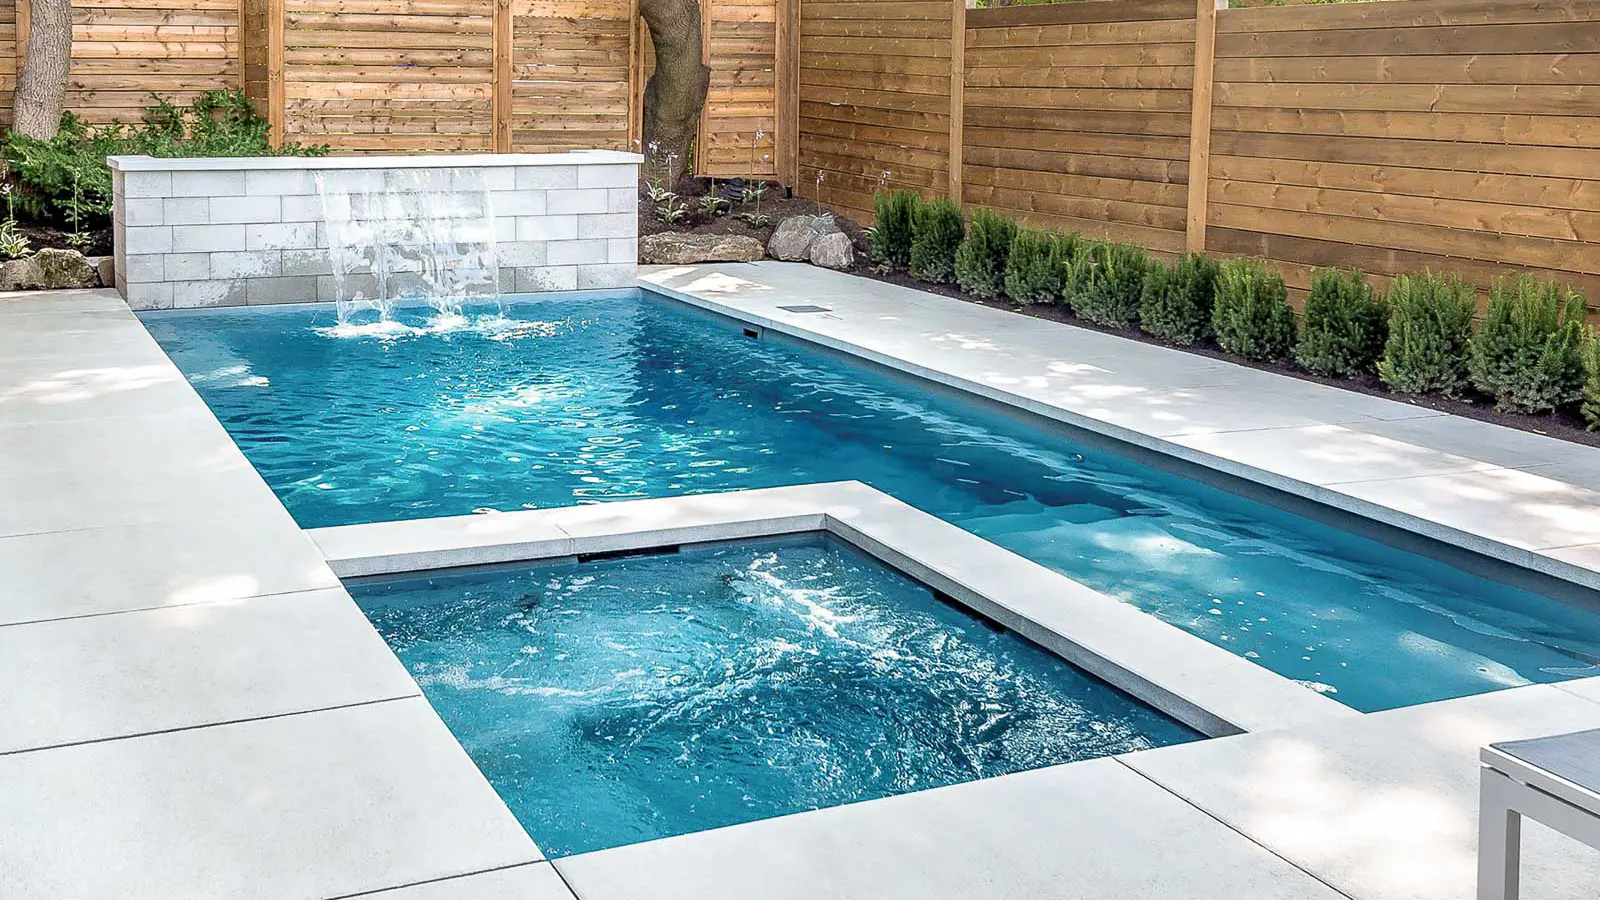 The Limitless, a fibreglass pool with a built-in spa and splash pad